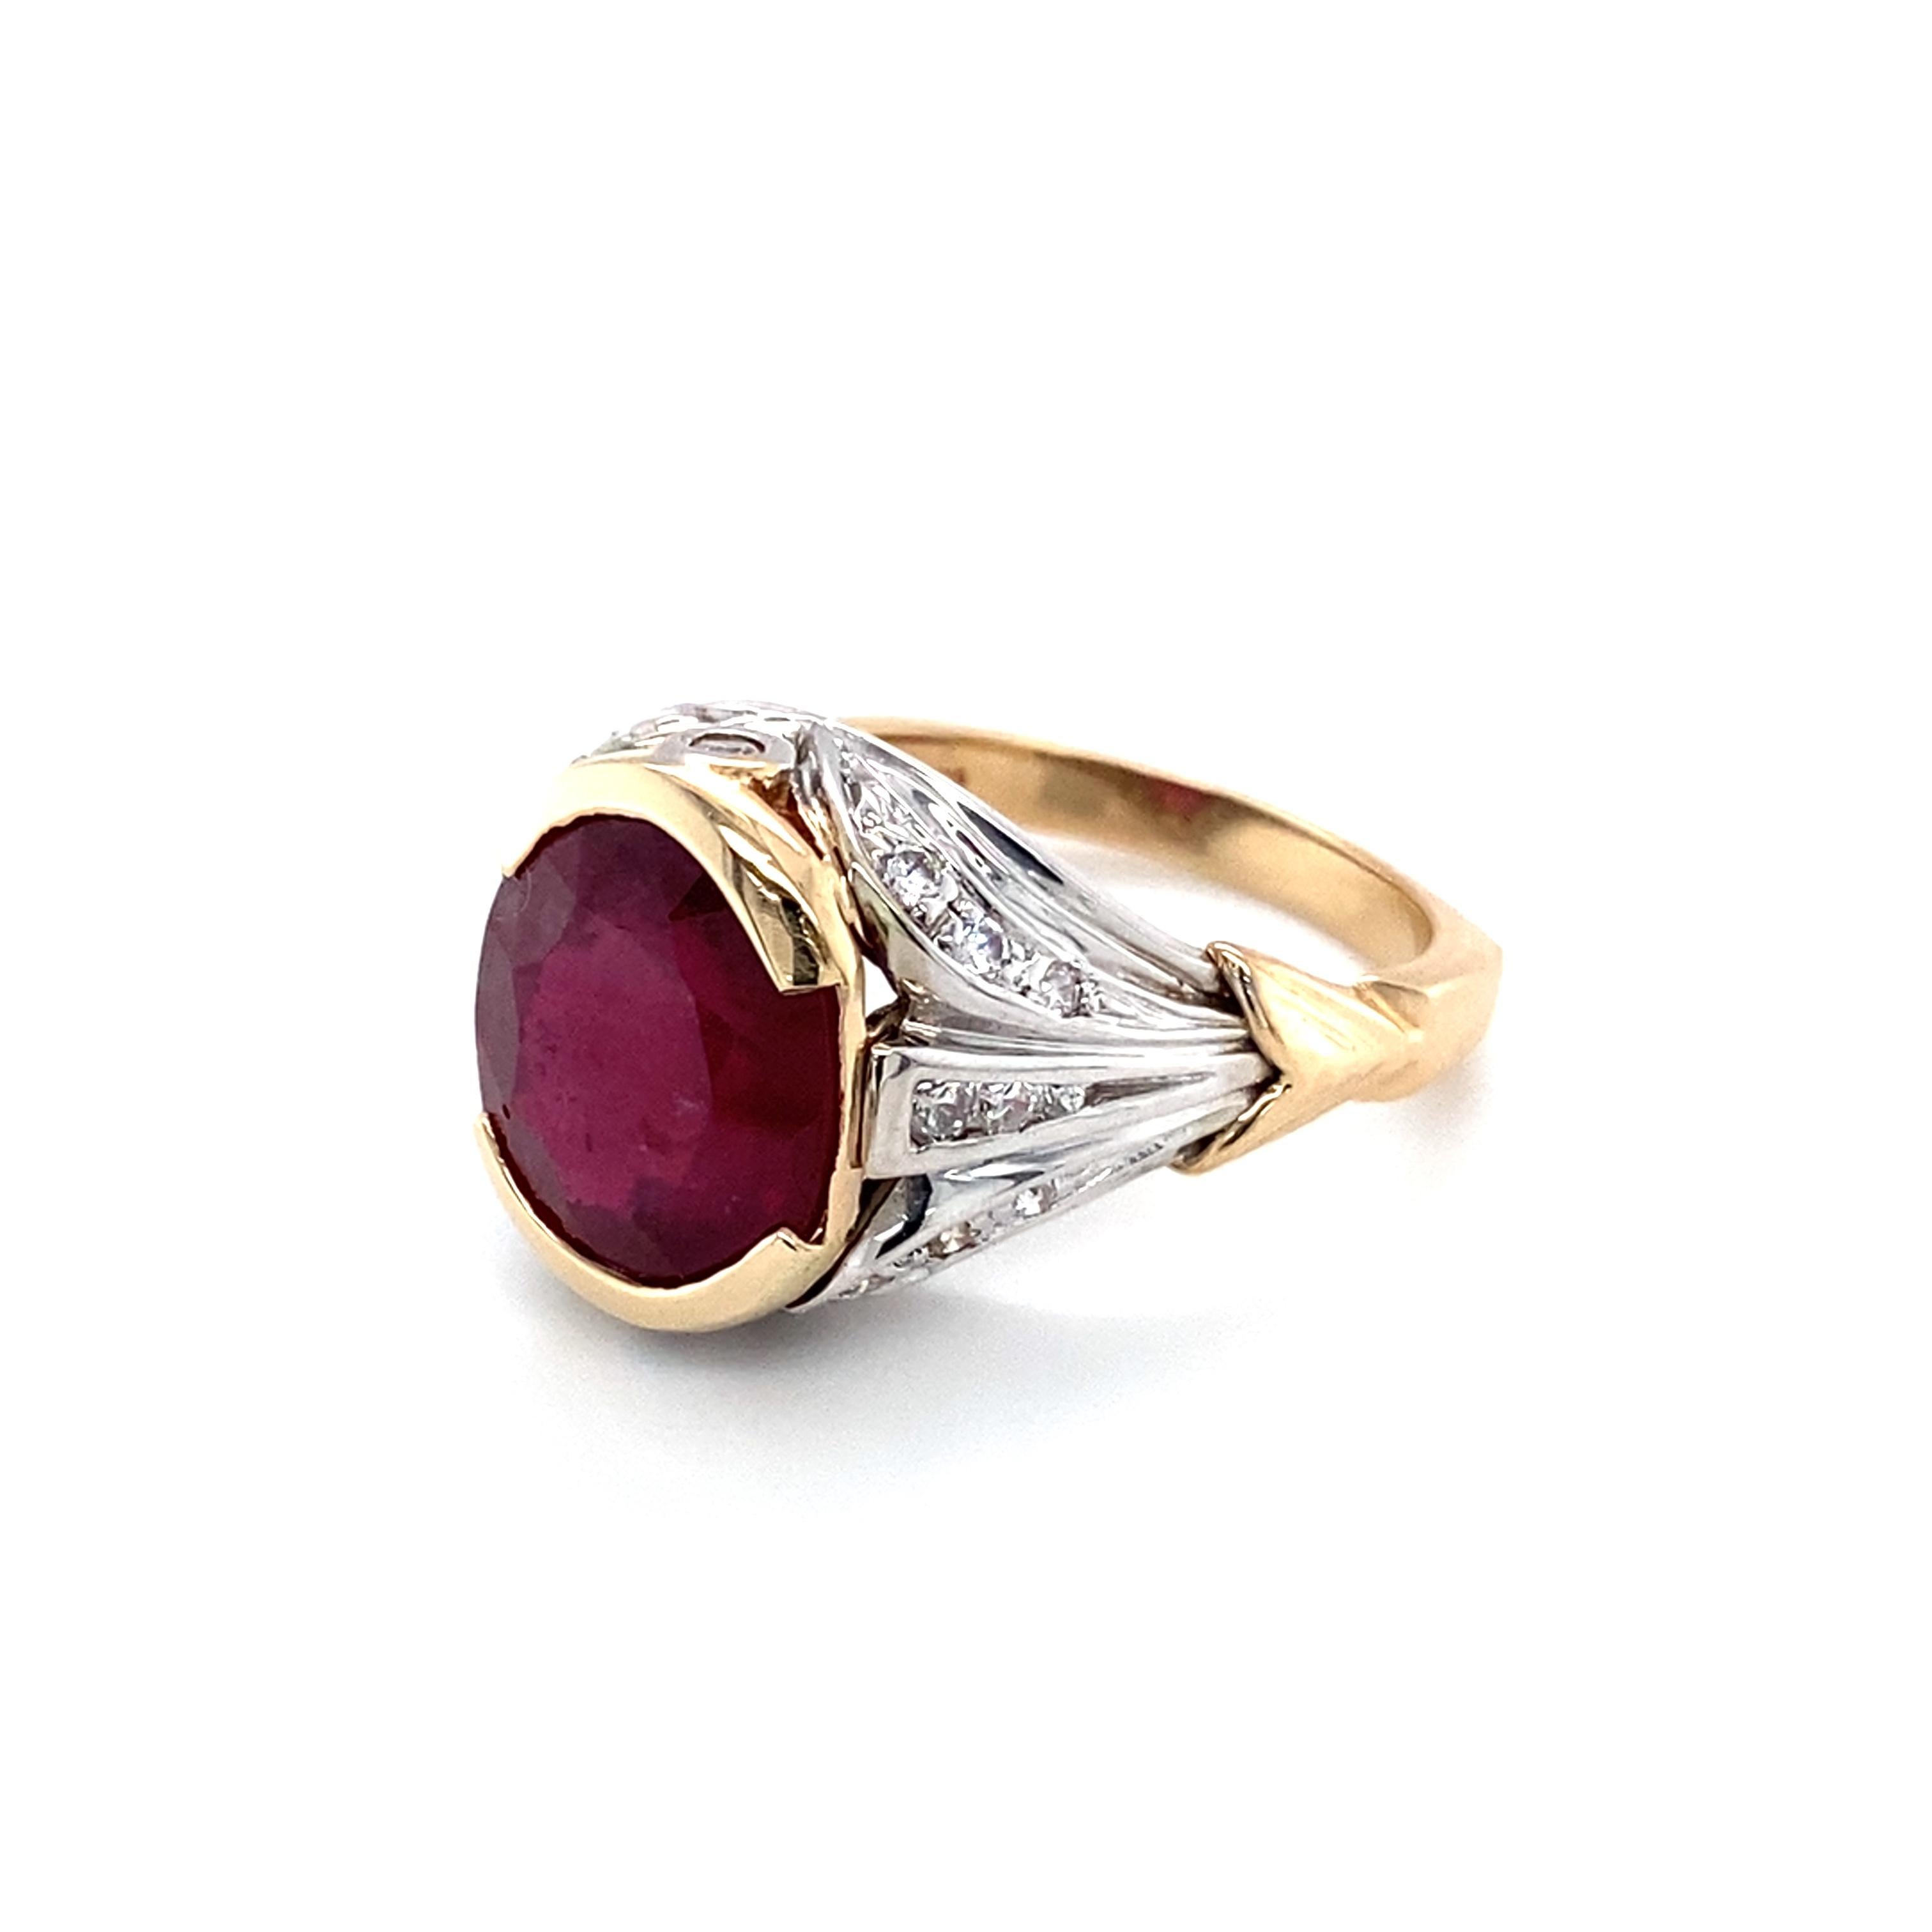 Item Details:
1960s Retro
Gemstone: Ruby and Diamond
Size: 9.5, can be resized
Metal: 14 Karat Yellow Gold & Platinum
Weight: 9 grams

Ruby Details:
Cut: Oval
Carat: 5.20 
Color: Pigeon Blood Red

Diamond Details:
Carat: 0.30 carat total weight
Cut: